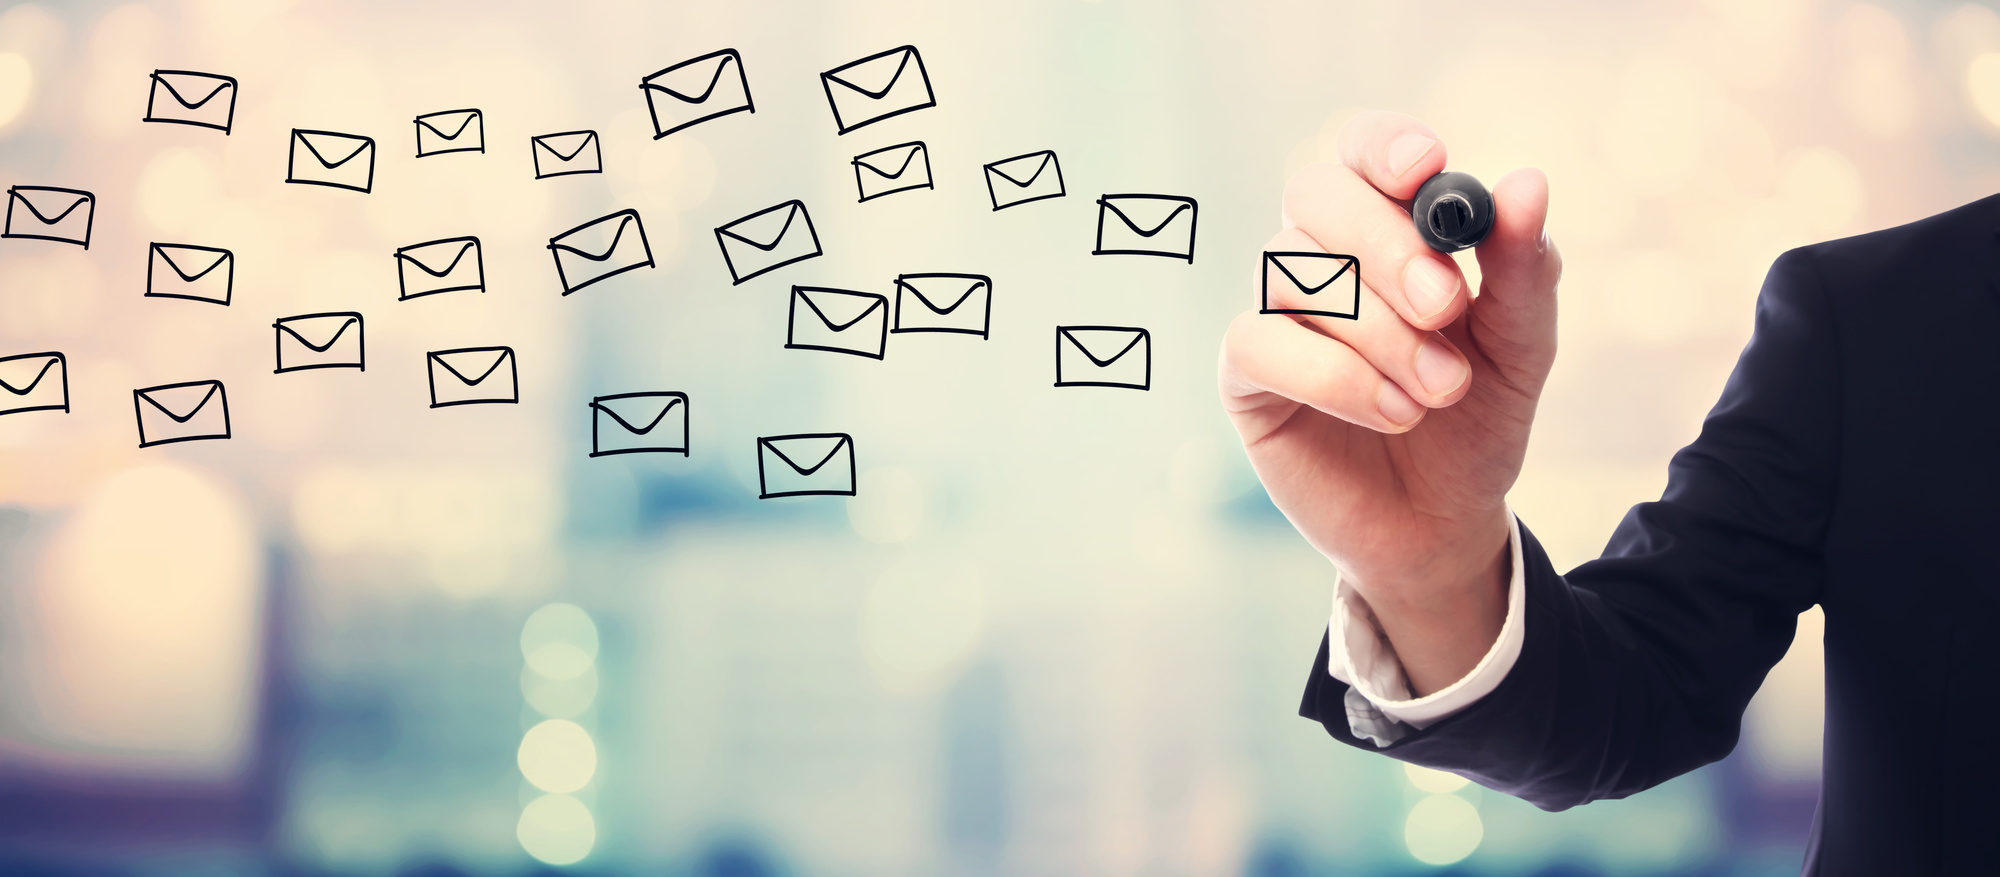 5 Hot Email Marketing Trends for 2021